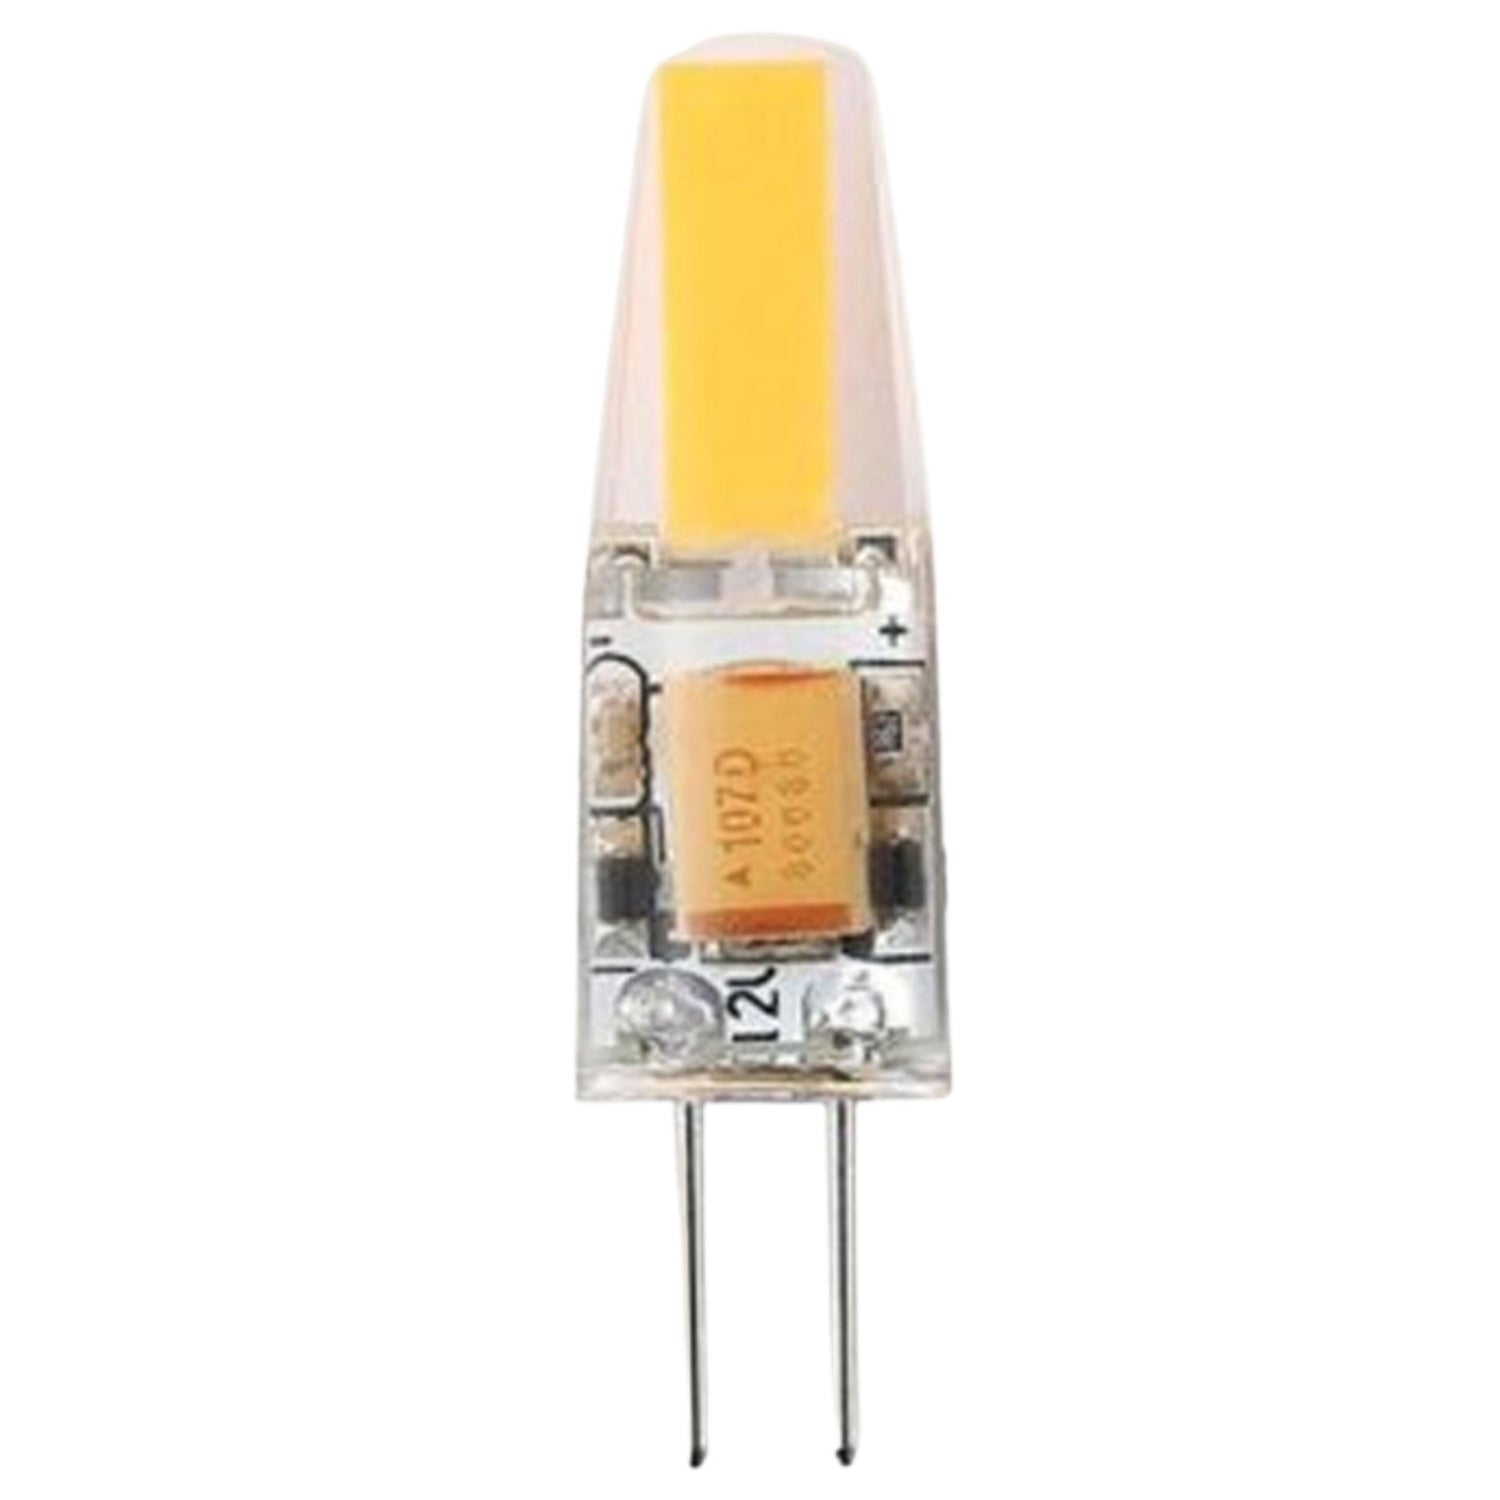 RPM GY6.35 Dimmable LED Lamp